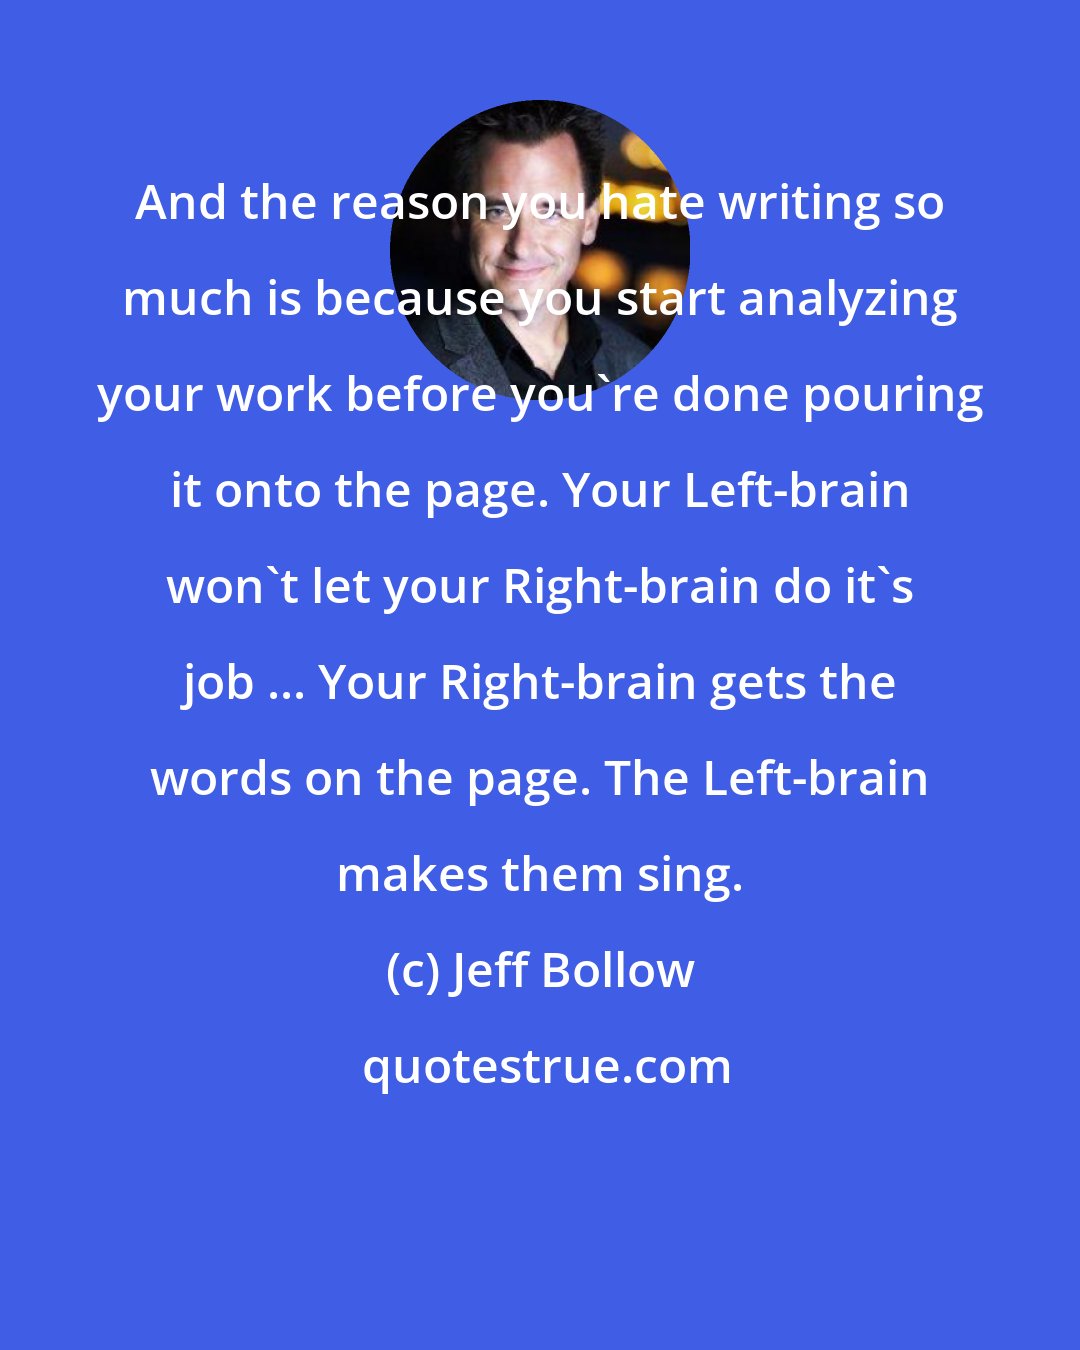 Jeff Bollow: And the reason you hate writing so much is because you start analyzing your work before you're done pouring it onto the page. Your Left-brain won't let your Right-brain do it's job ... Your Right-brain gets the words on the page. The Left-brain makes them sing.